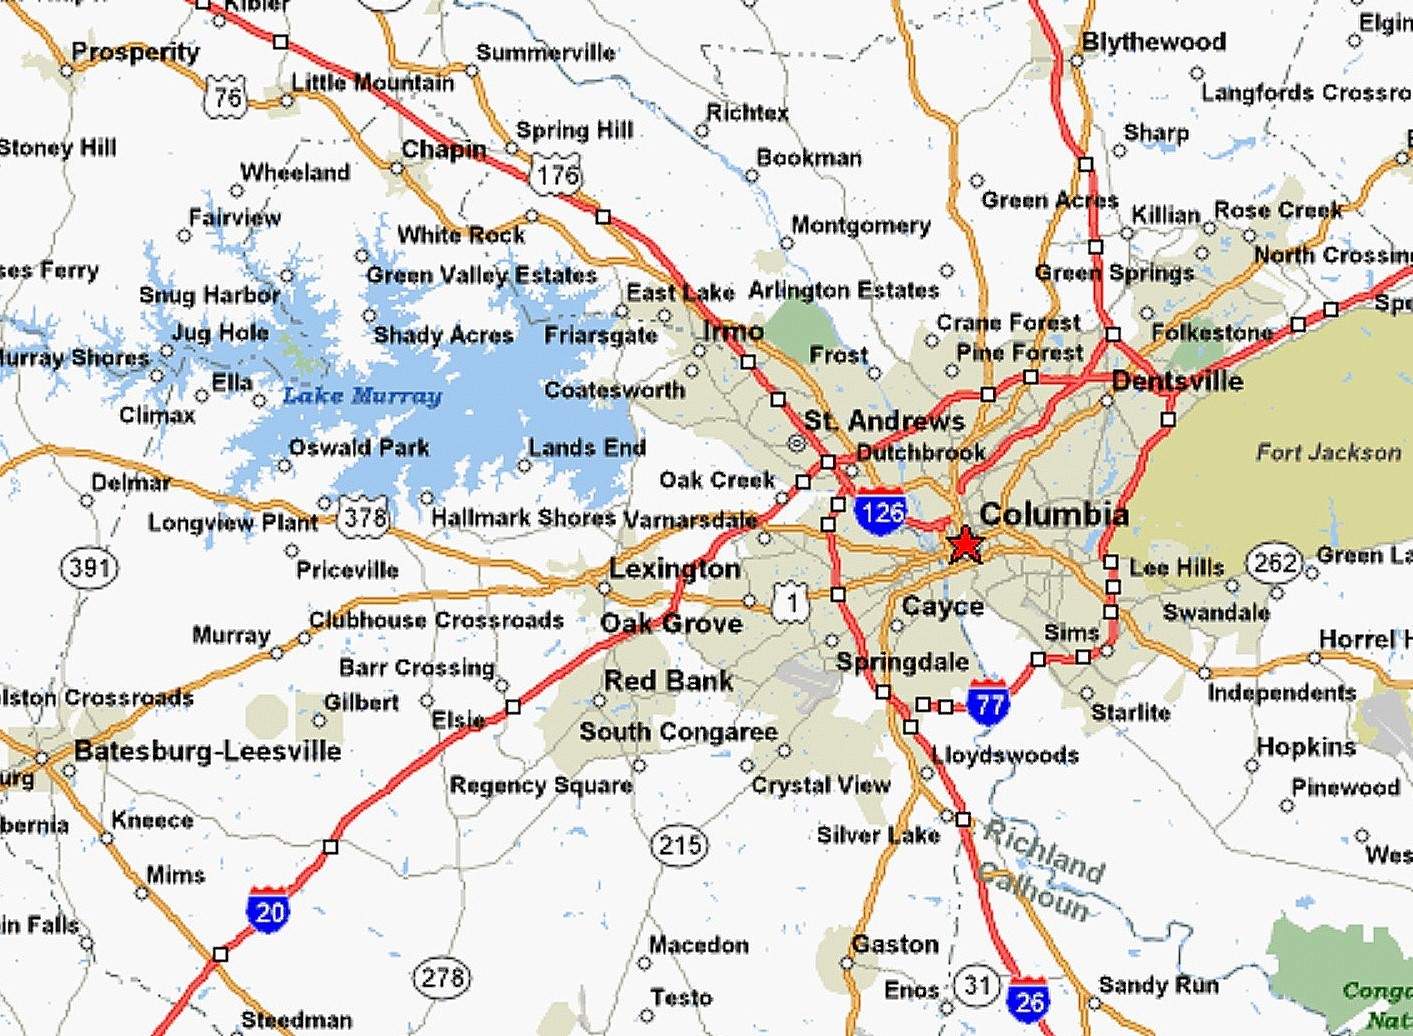 Map of the Columbia, SC area